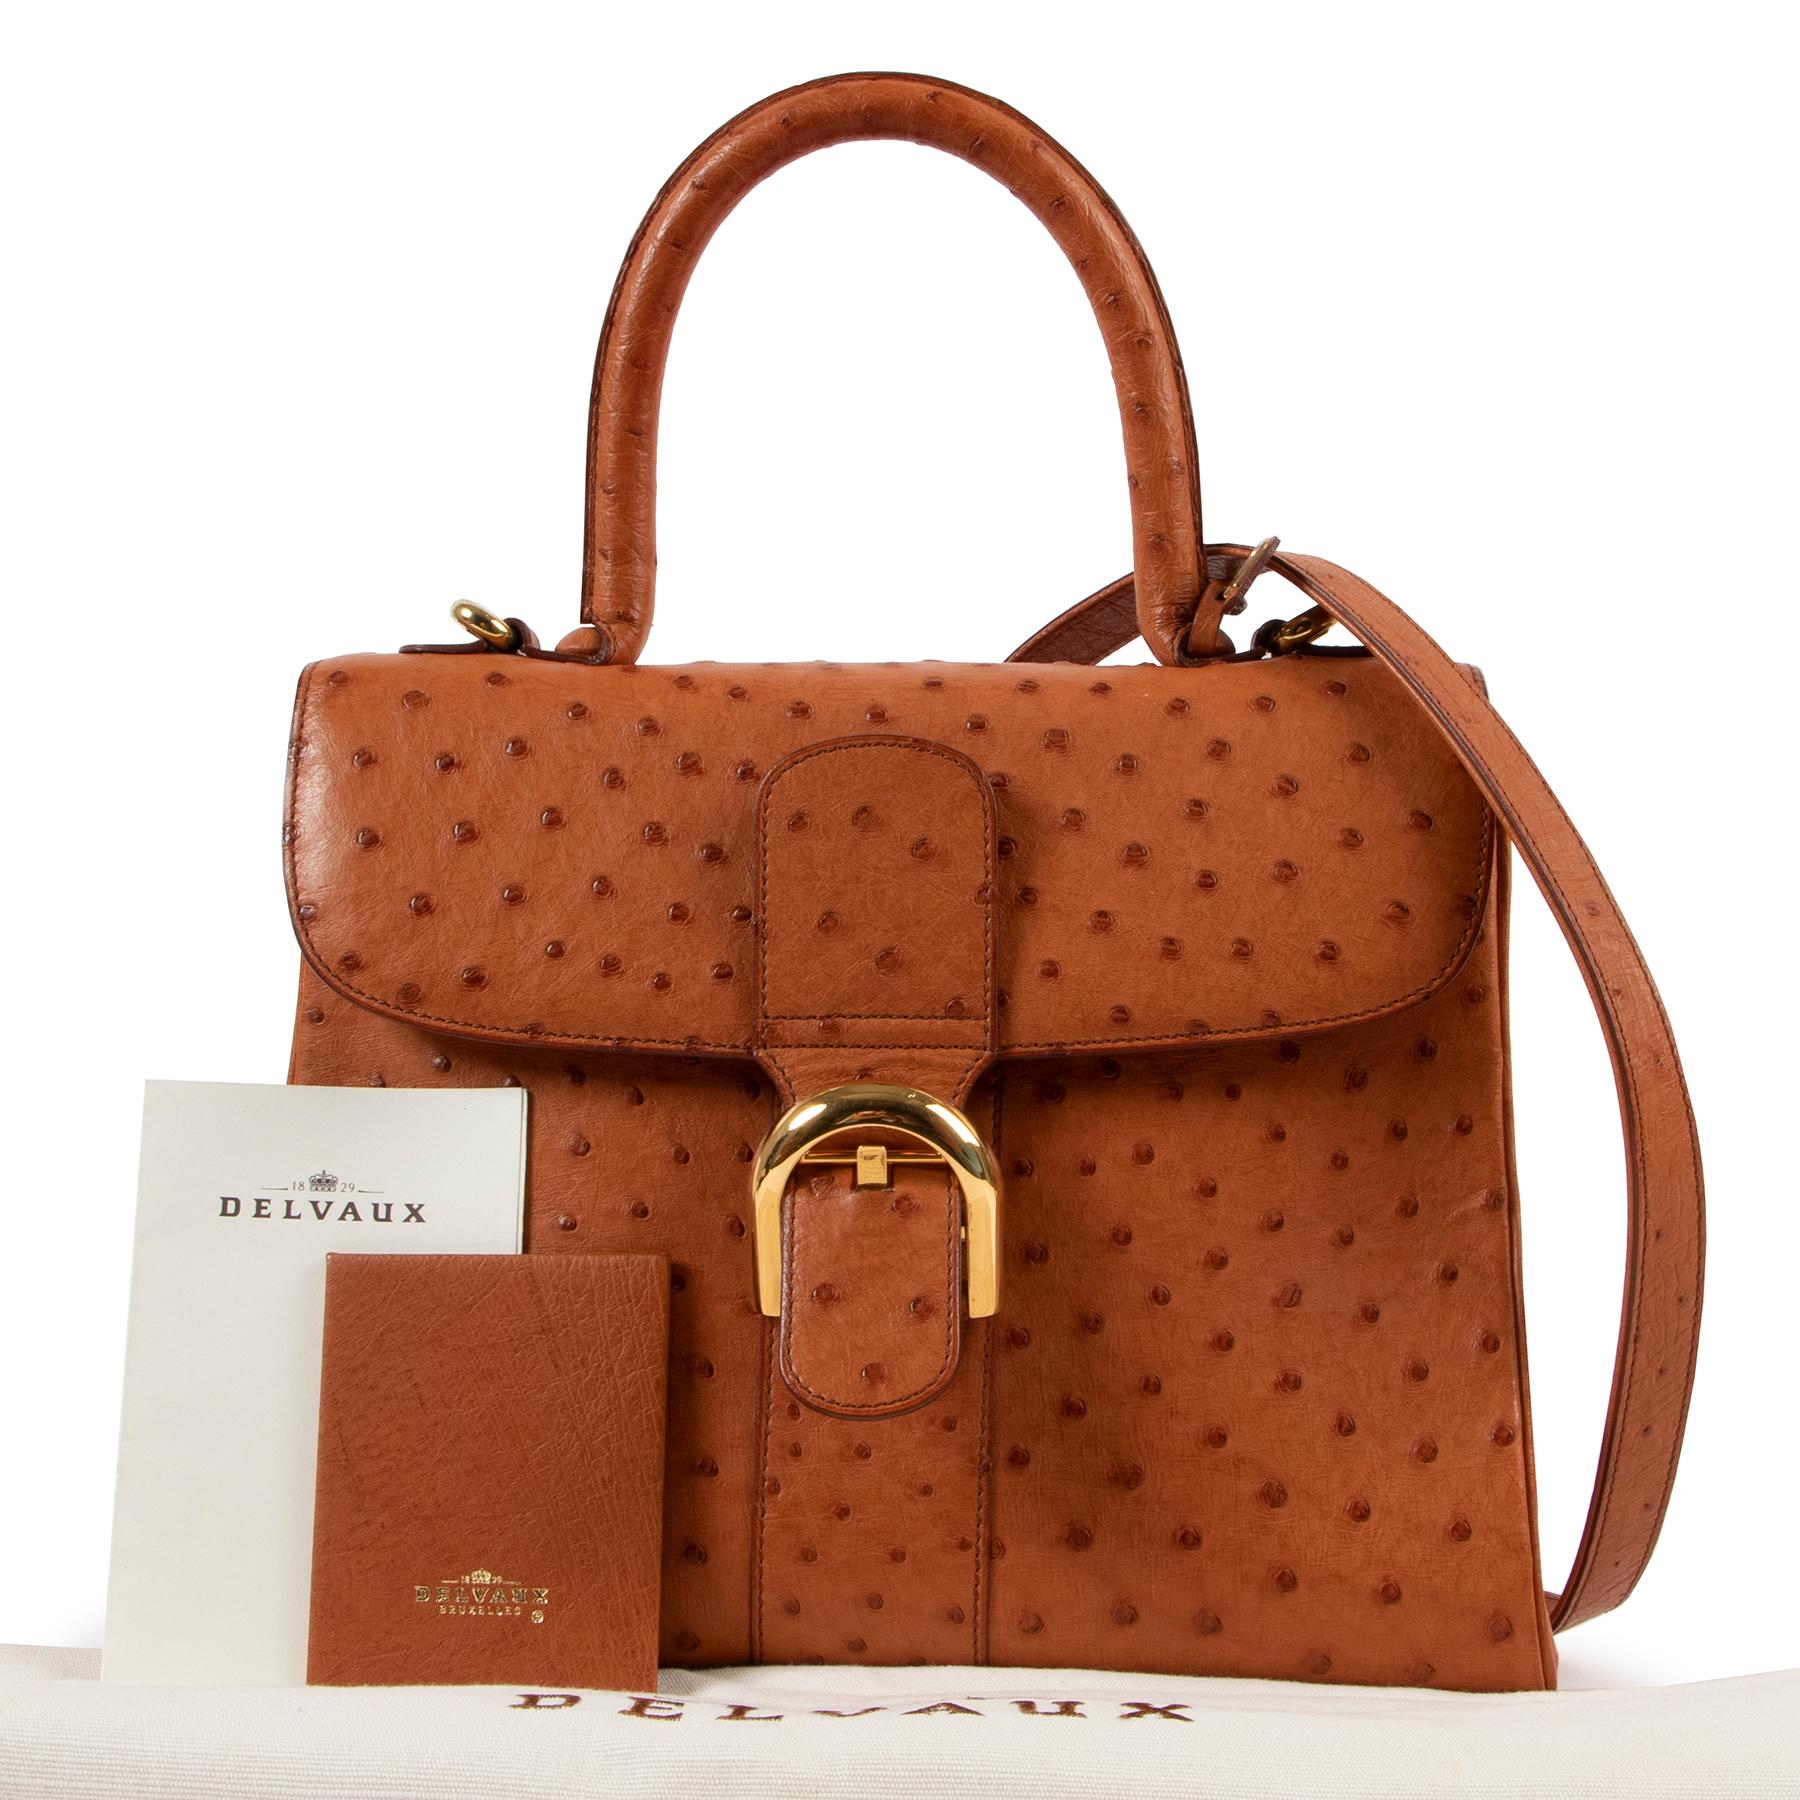 Delvaux Cognac Ostrich MM Brillant + Strap

The Delvaux Brillant, the most iconic and signature design of the house.

This Brillant MM is fashioned in ostrich leather and finished with gold toned details. The front flap contains the classic